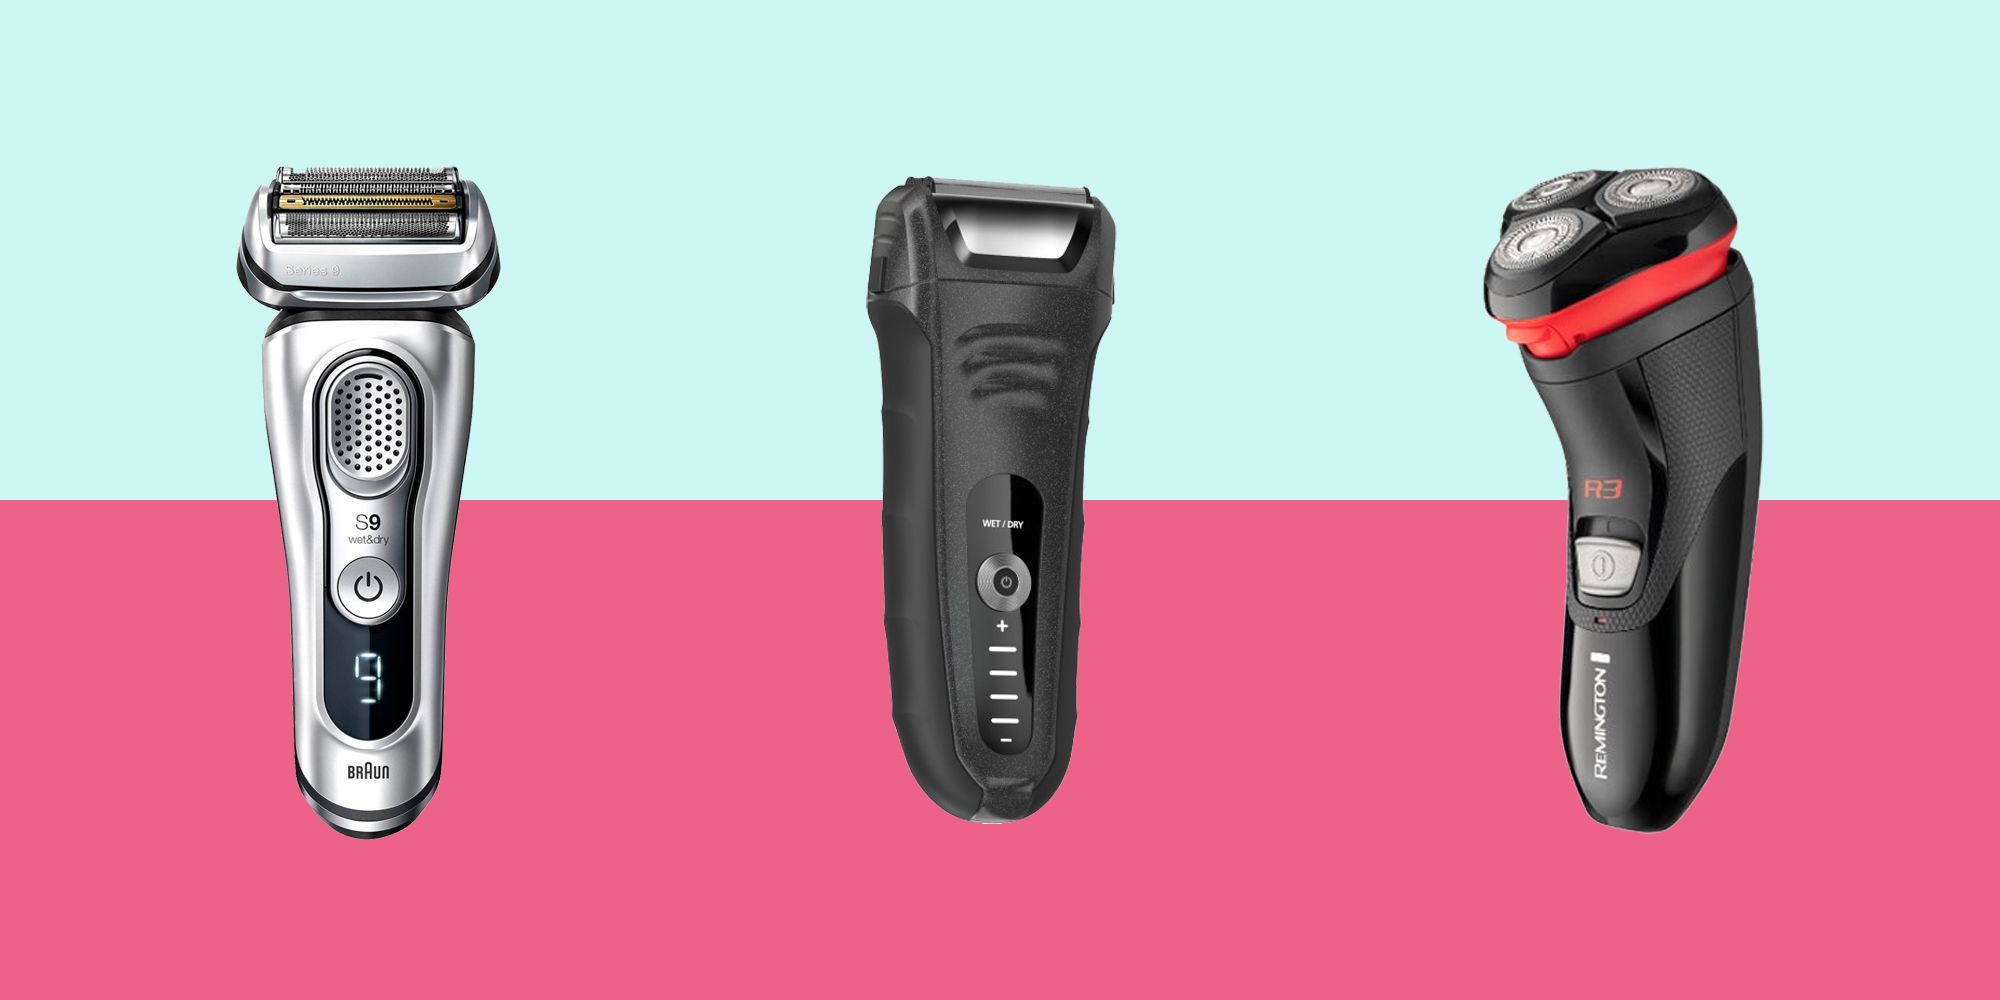 Wahl Lifeproof Shaver Review: Tough and cheap